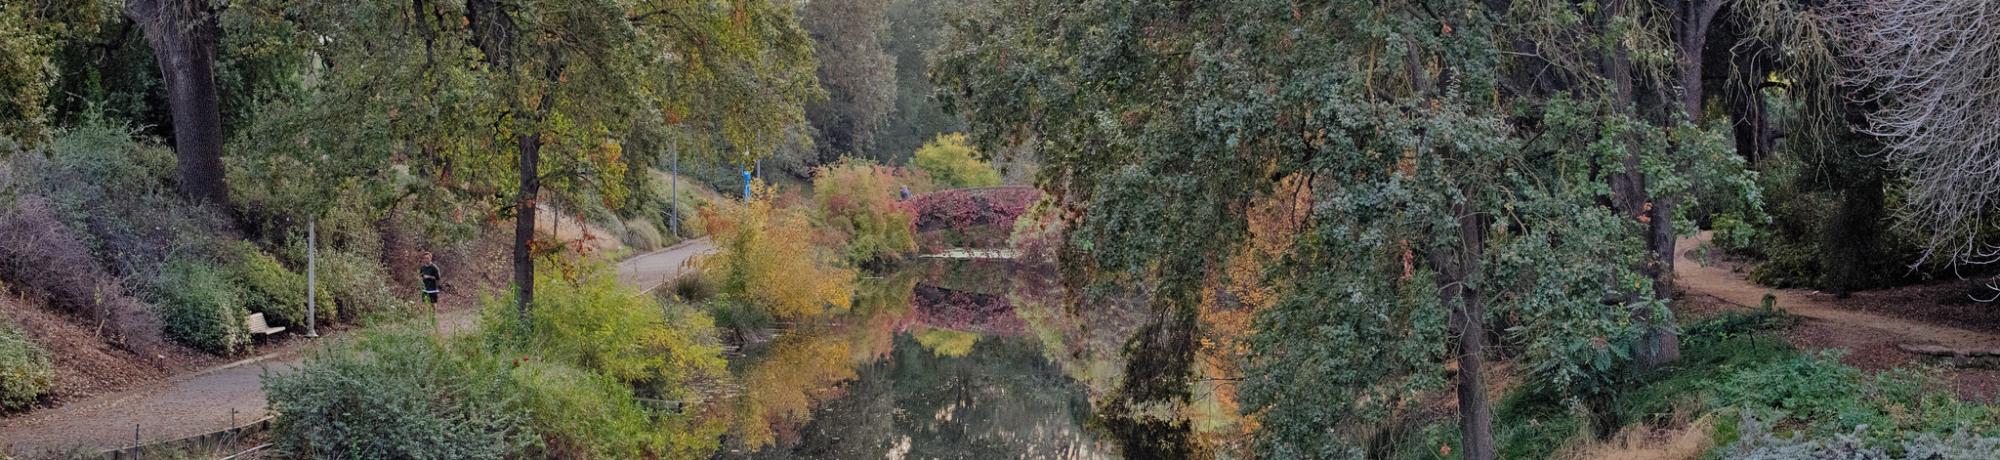 Image of the UC Davis Arboretum California Foothill Collection.